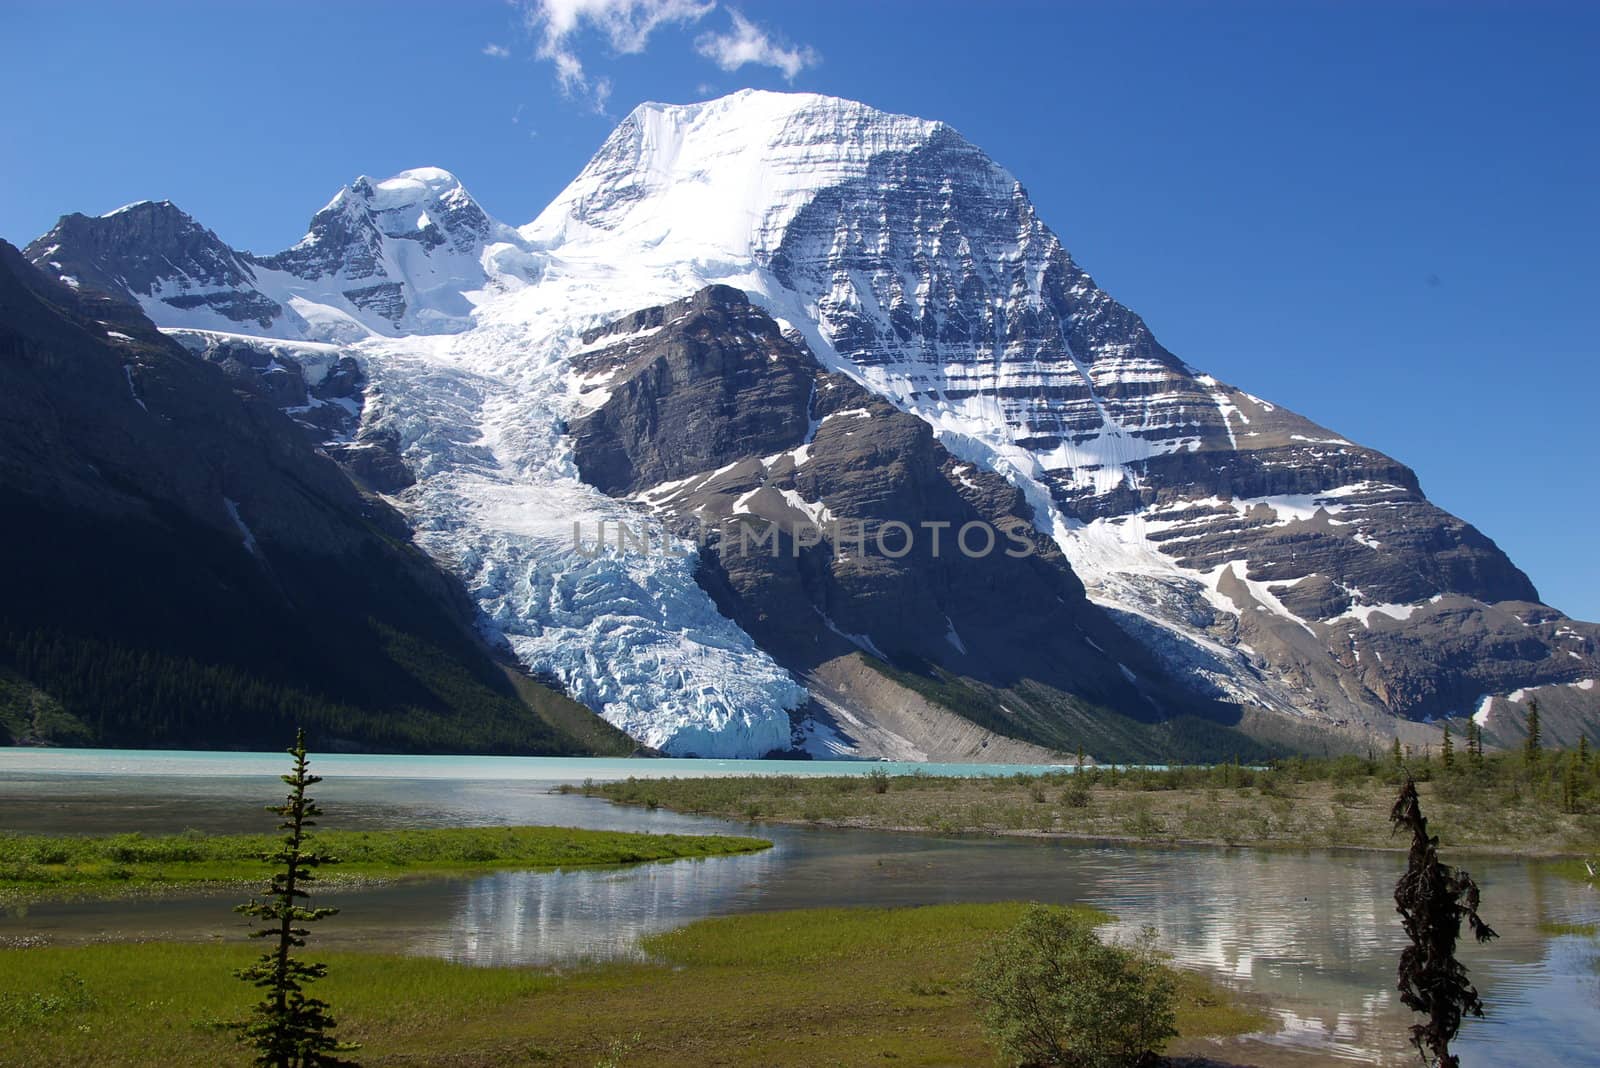 Mt. Robson in the Canadian rockies